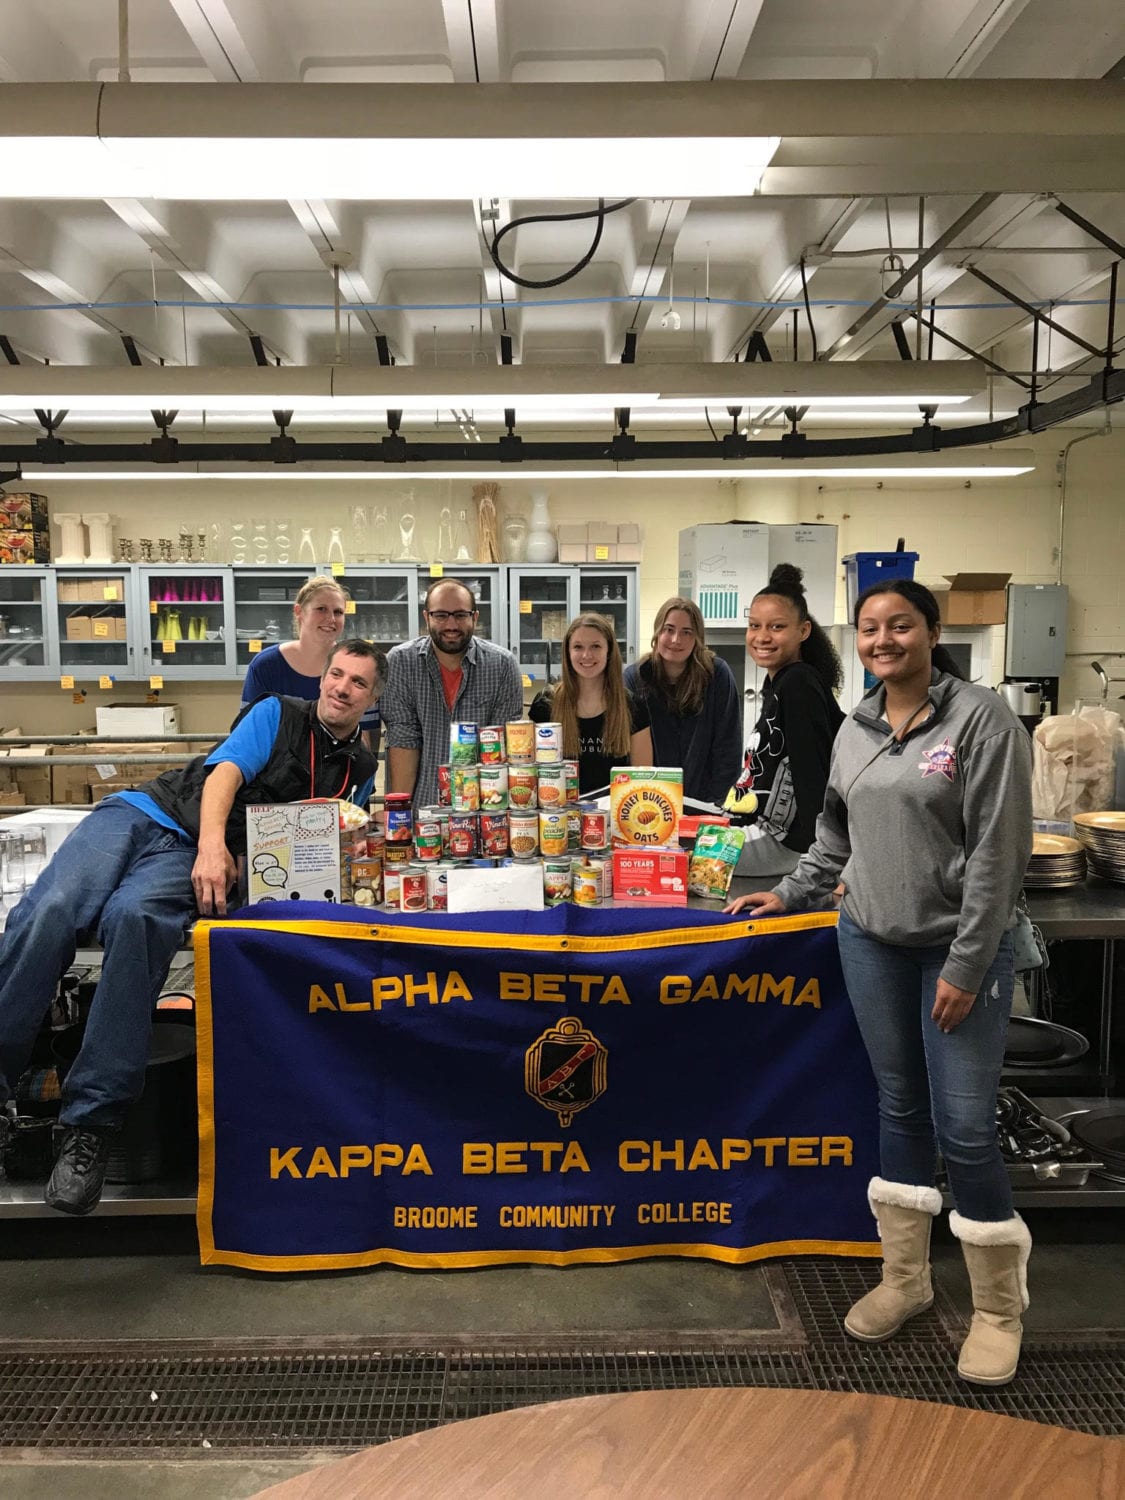 Buzz Report: Alpha Beta Gamma raises funds, collections donations for campus food pantry